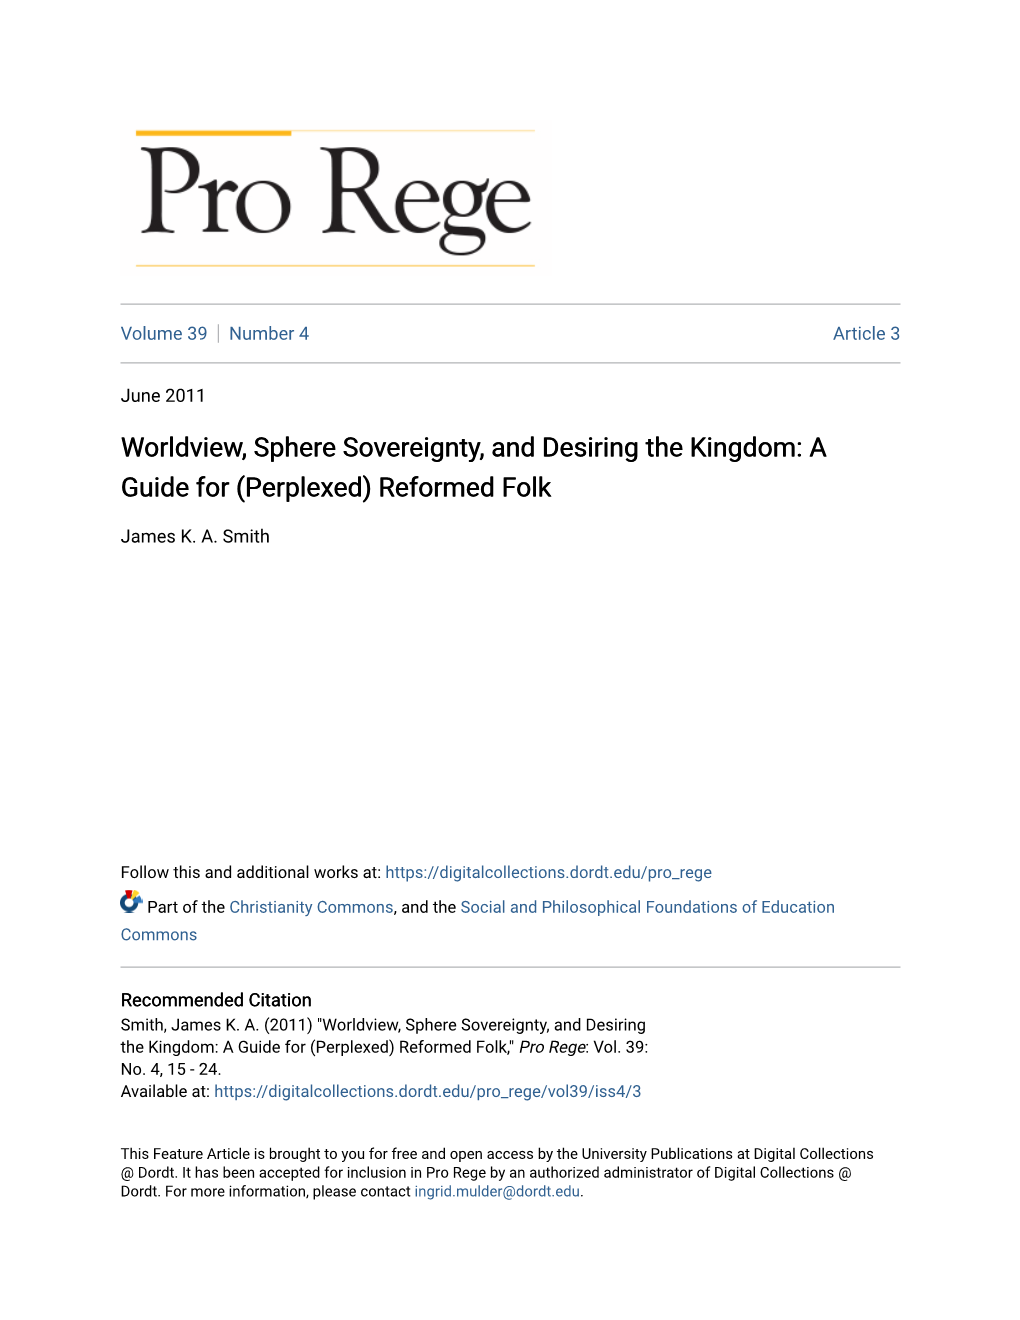 Worldview, Sphere Sovereignty, and Desiring the Kingdom: a Guide for (Perplexed) Reformed Folk